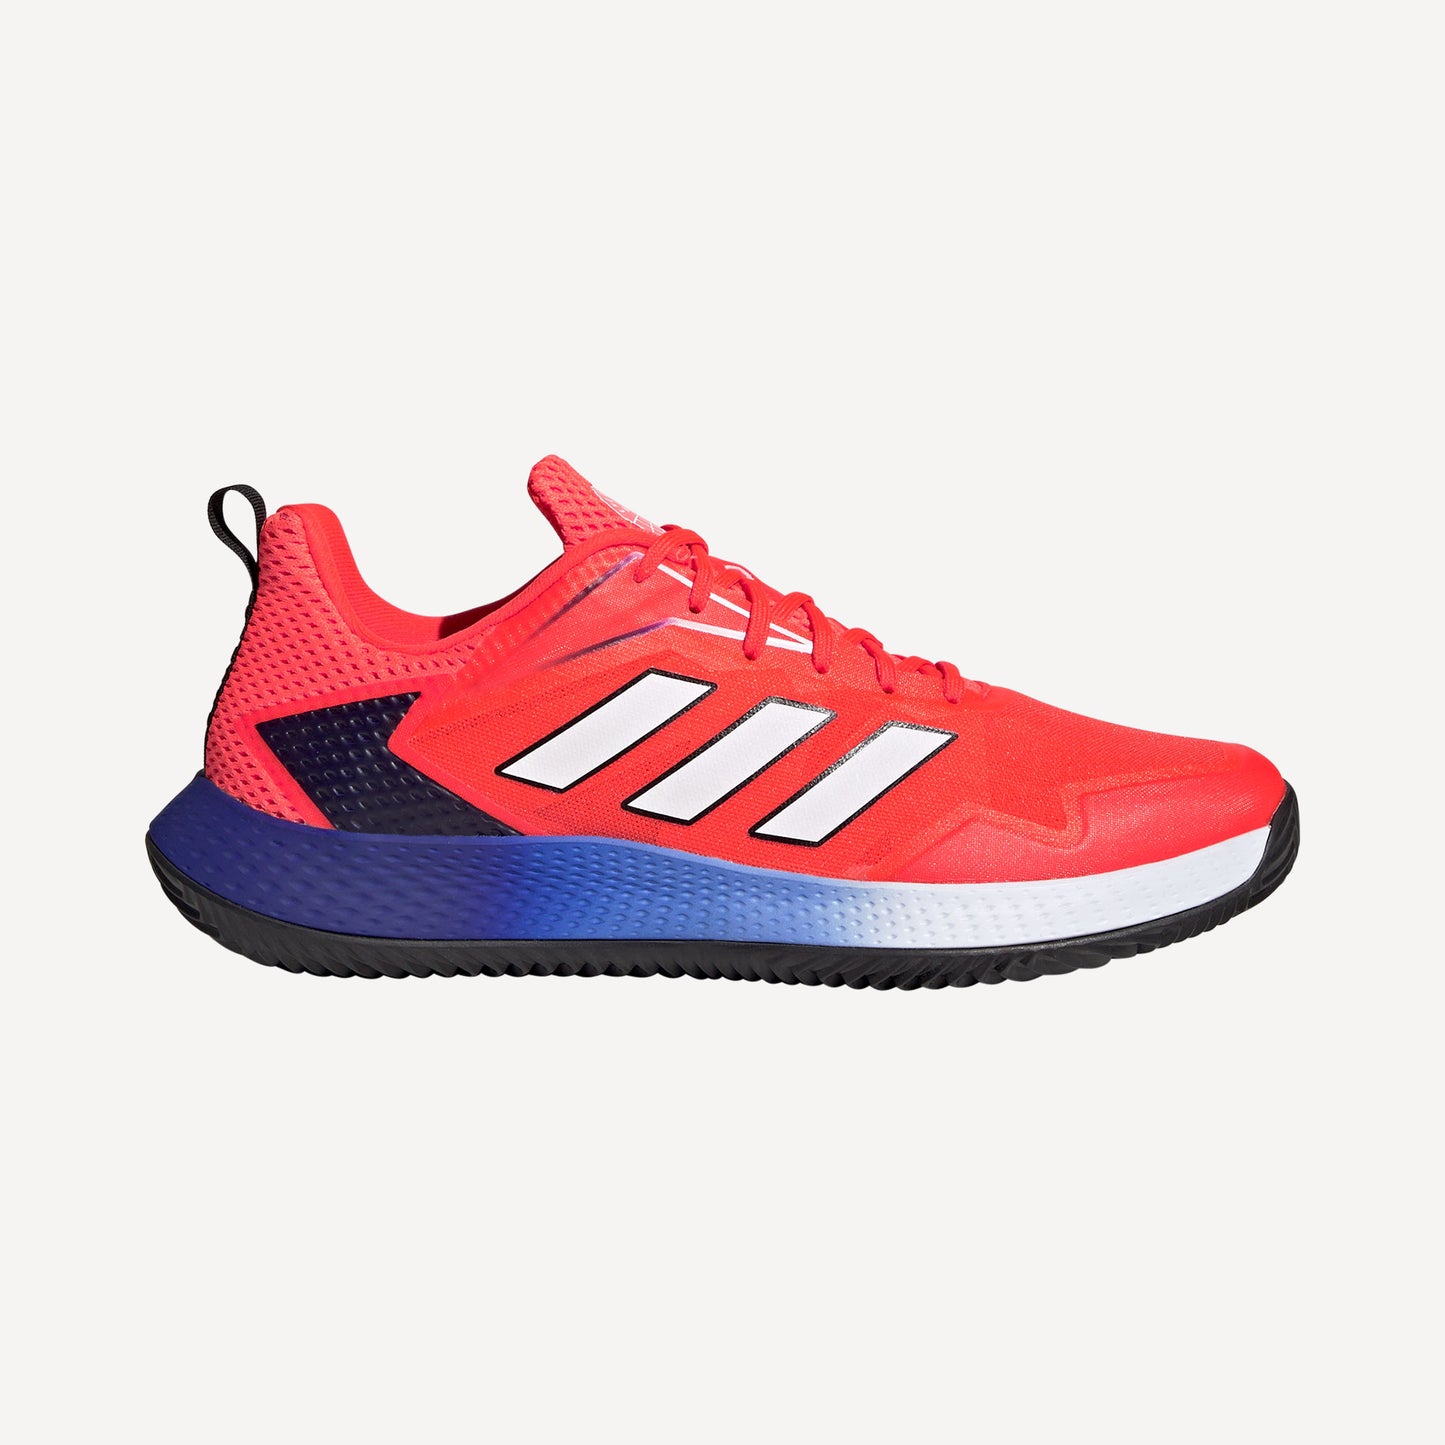 adidas Defiant Speed Men's Clay Court Tennis Shoes Red (1)